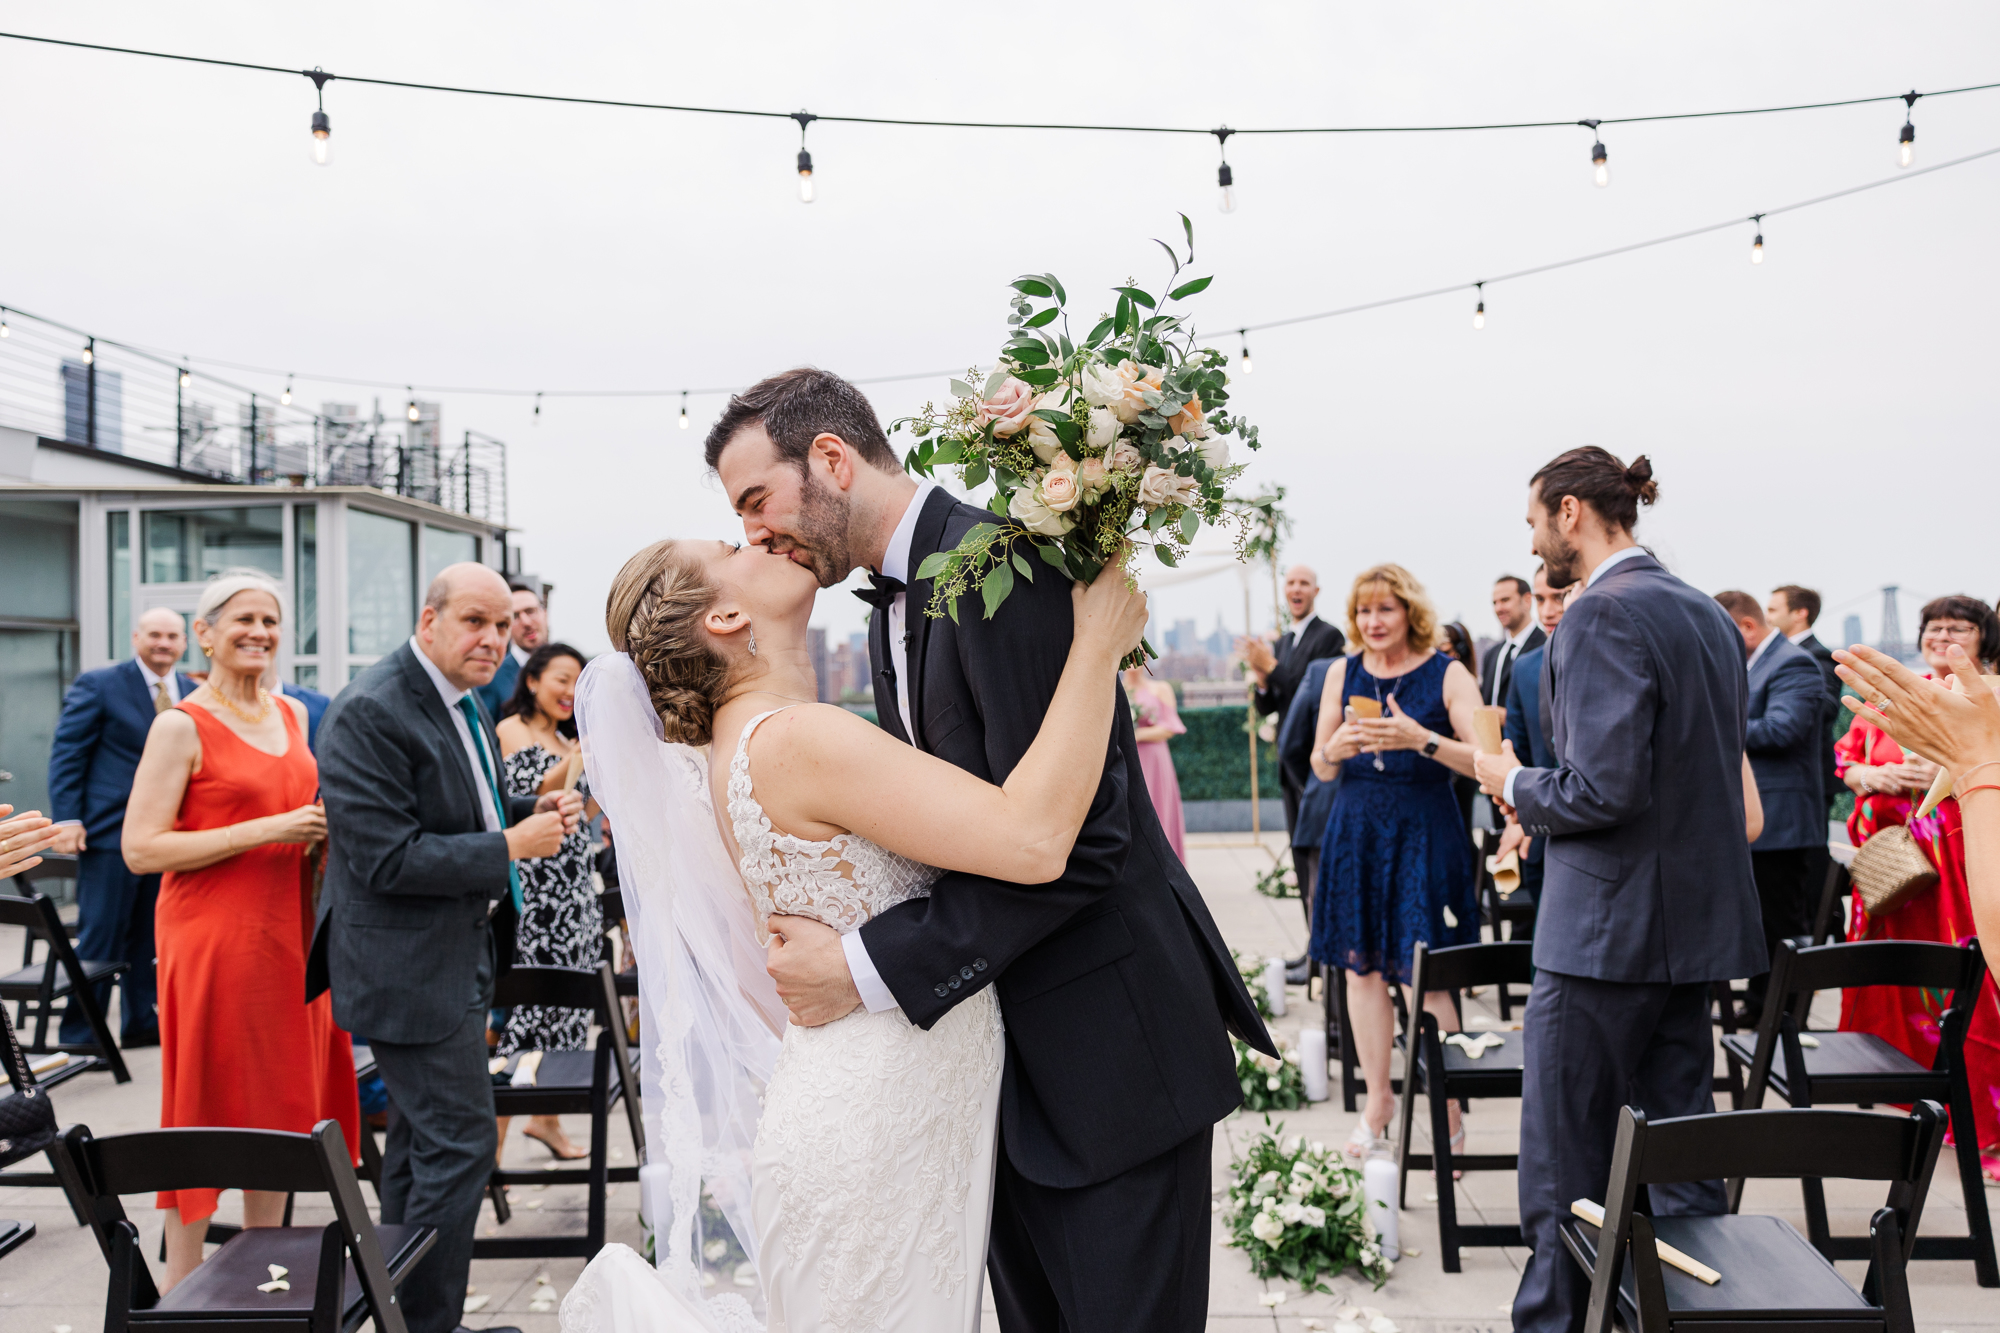 Incredible Brooklyn Wedding Photos at Bridgepoint Featuring the New York City Skyline 